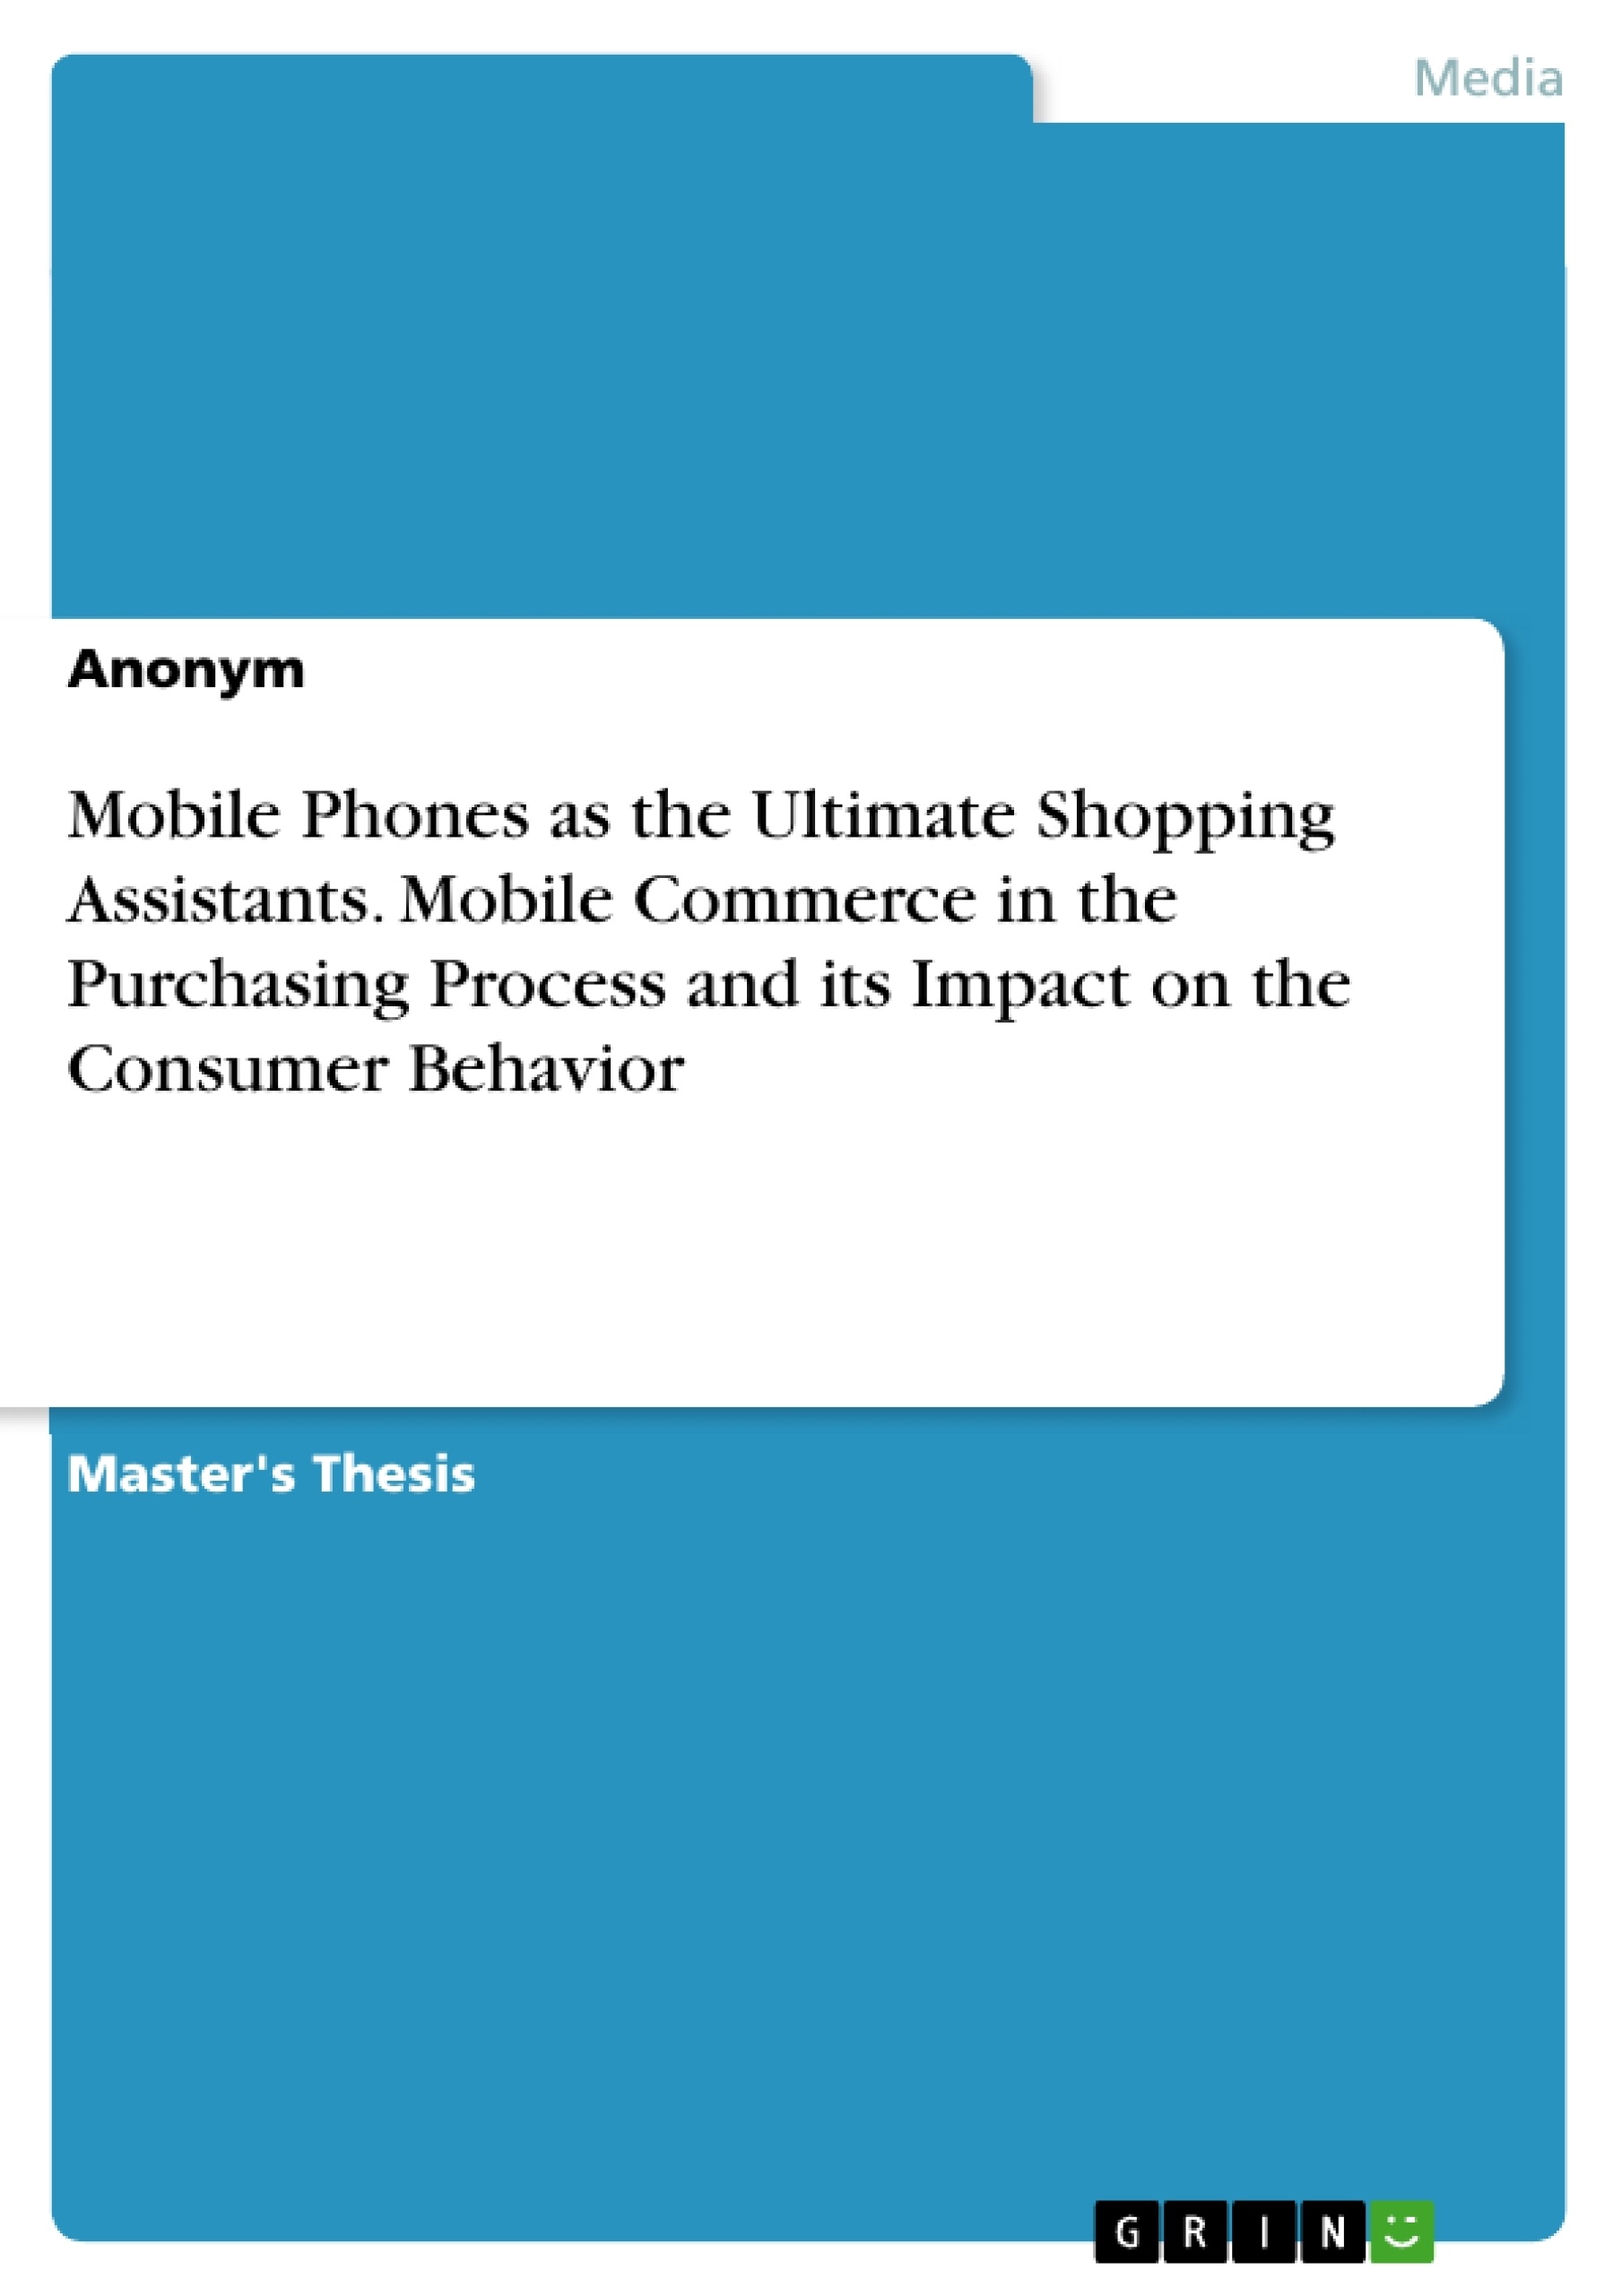 Titre: Mobile Phones as the Ultimate Shopping Assistants. Mobile Commerce in the Purchasing Process and its Impact on the Consumer Behavior